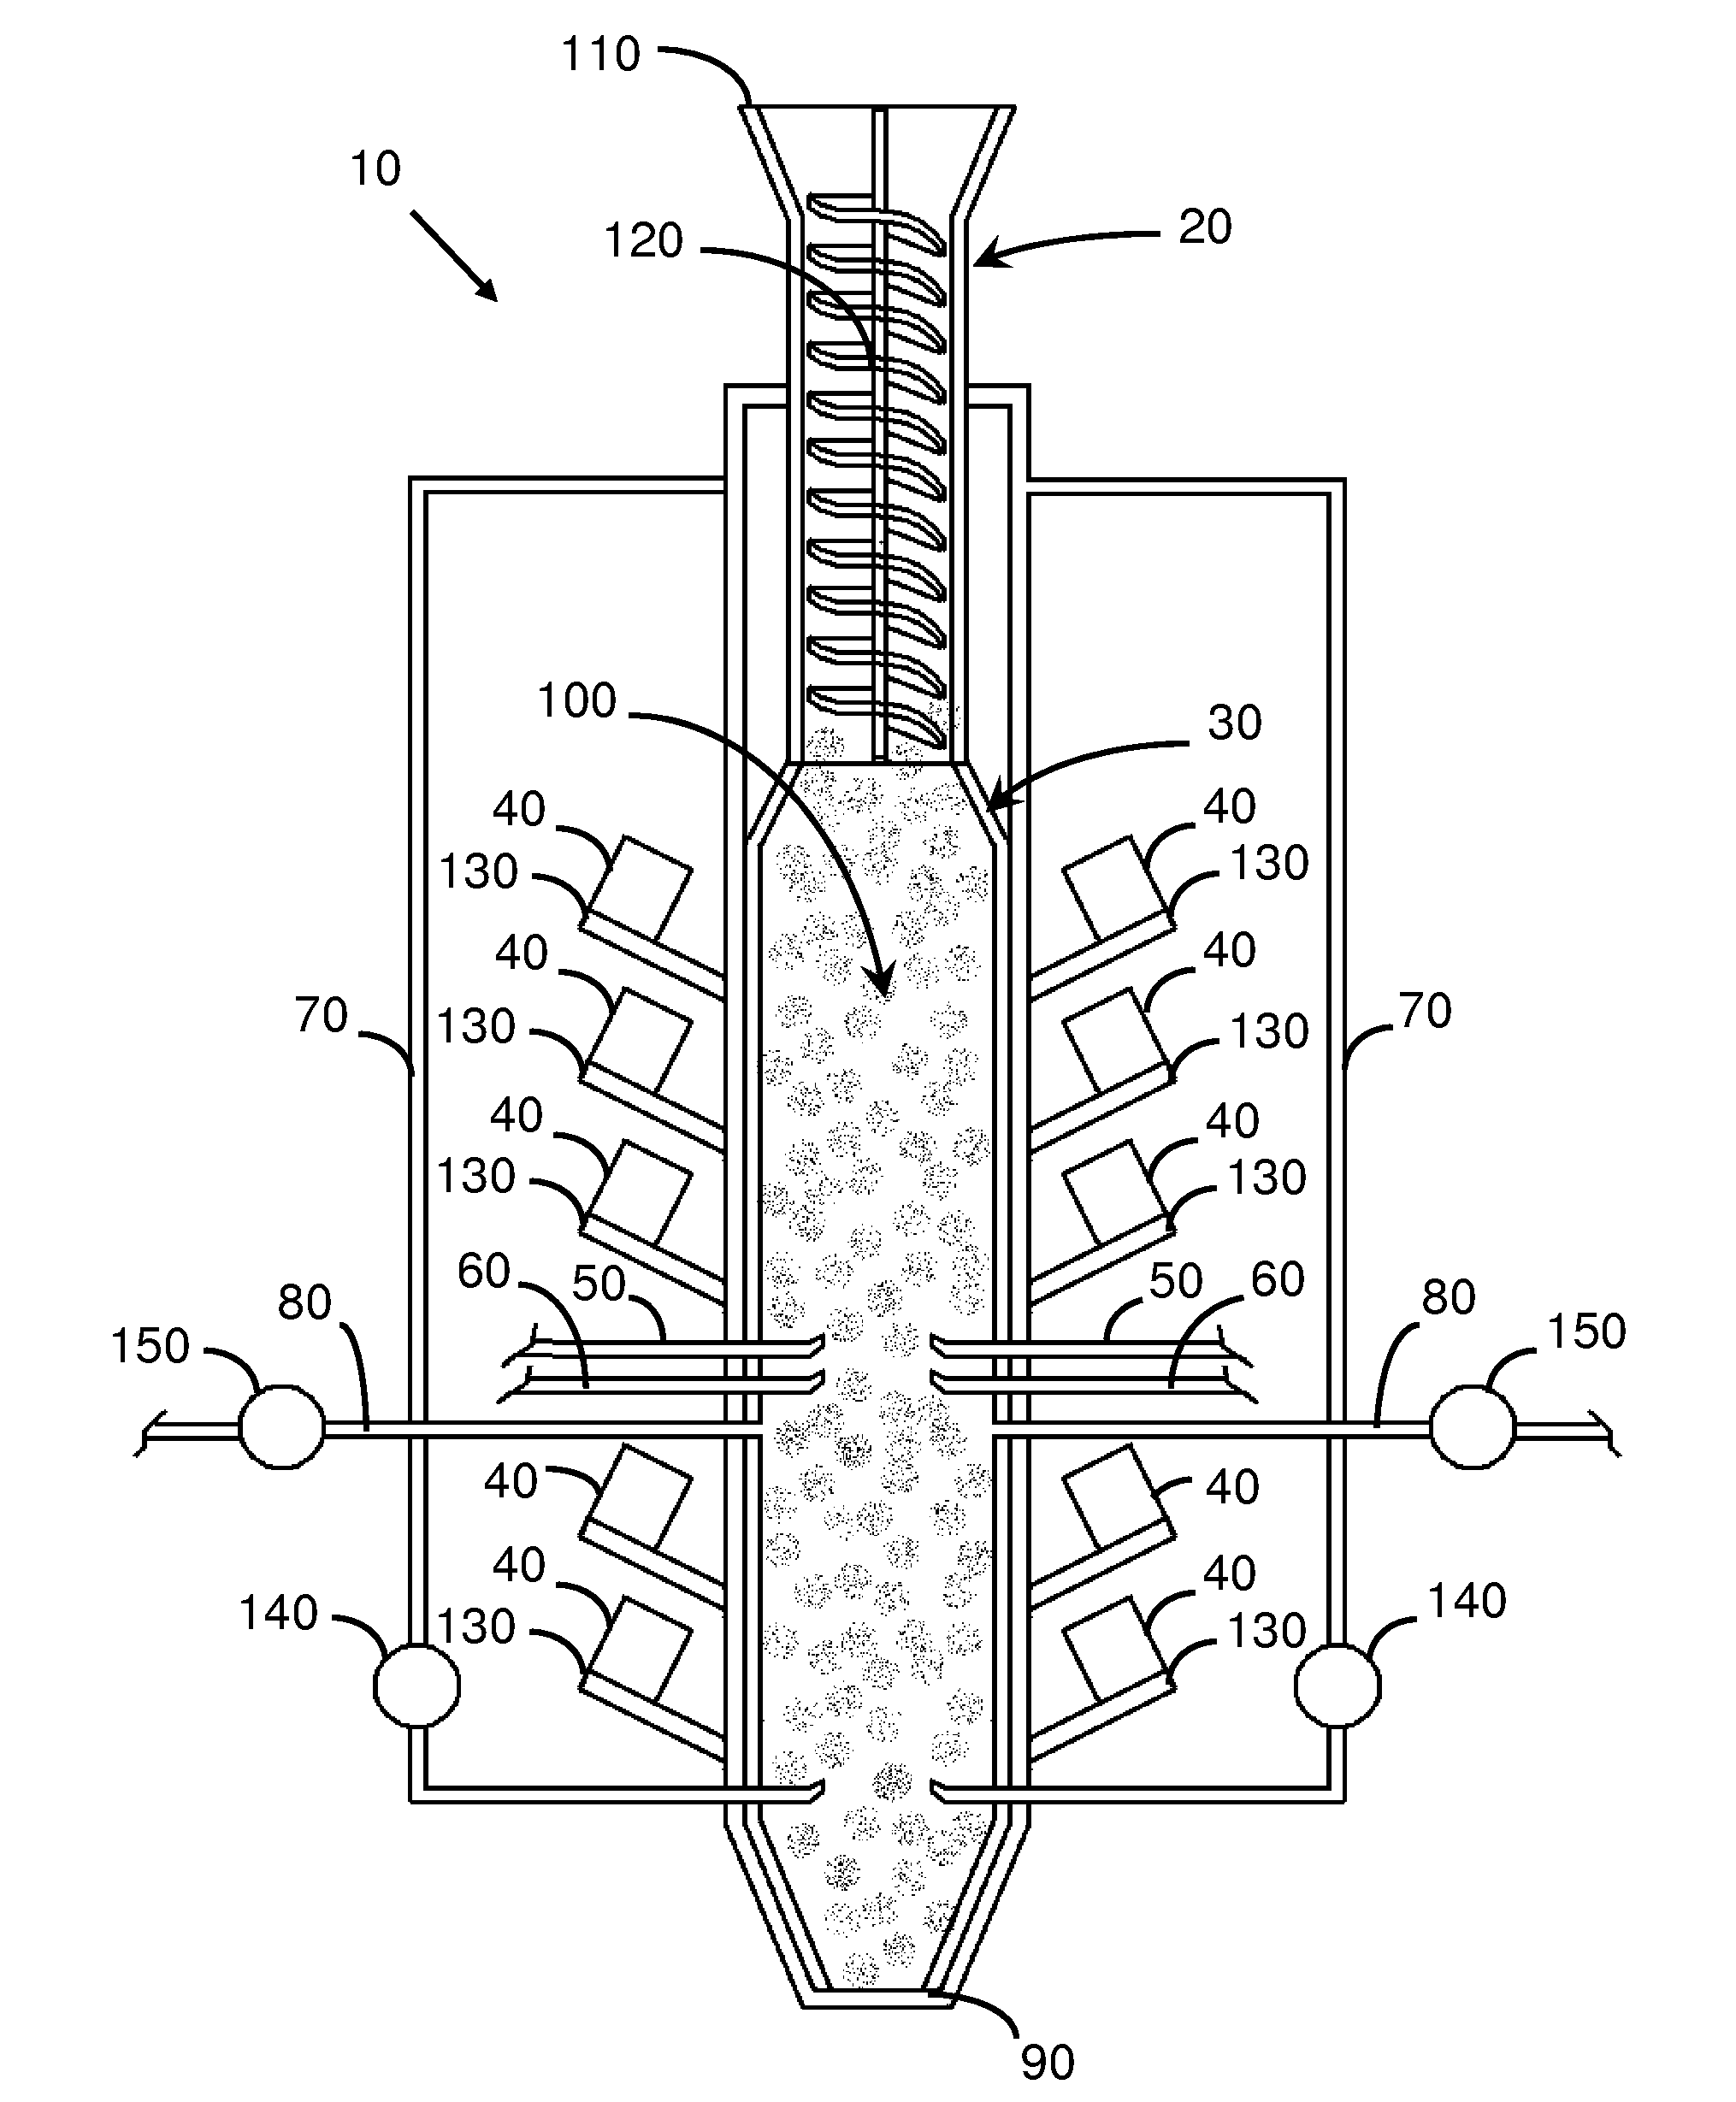 Method and apparatus for plasma gasification of carbonic material by means of microwave radiation